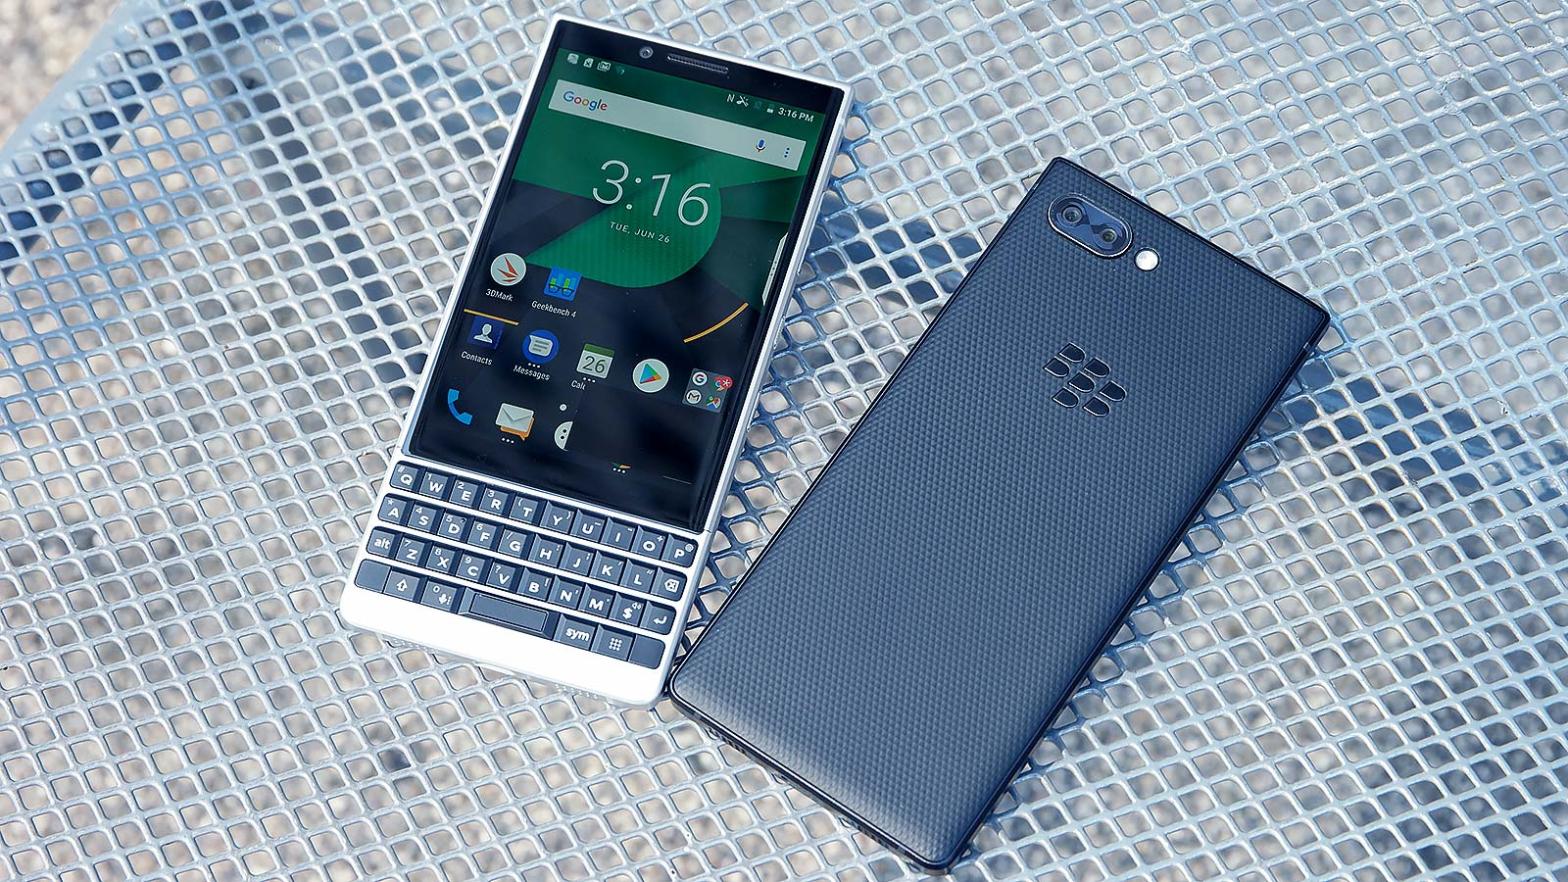 The BlackBerry Key 2 (pictured above), may be the last real consumer BlackBerry phone now that OnwardMobility is planning to revive the brand with a new focus on enterprise customers.  (Photo: Sam Rutherford)